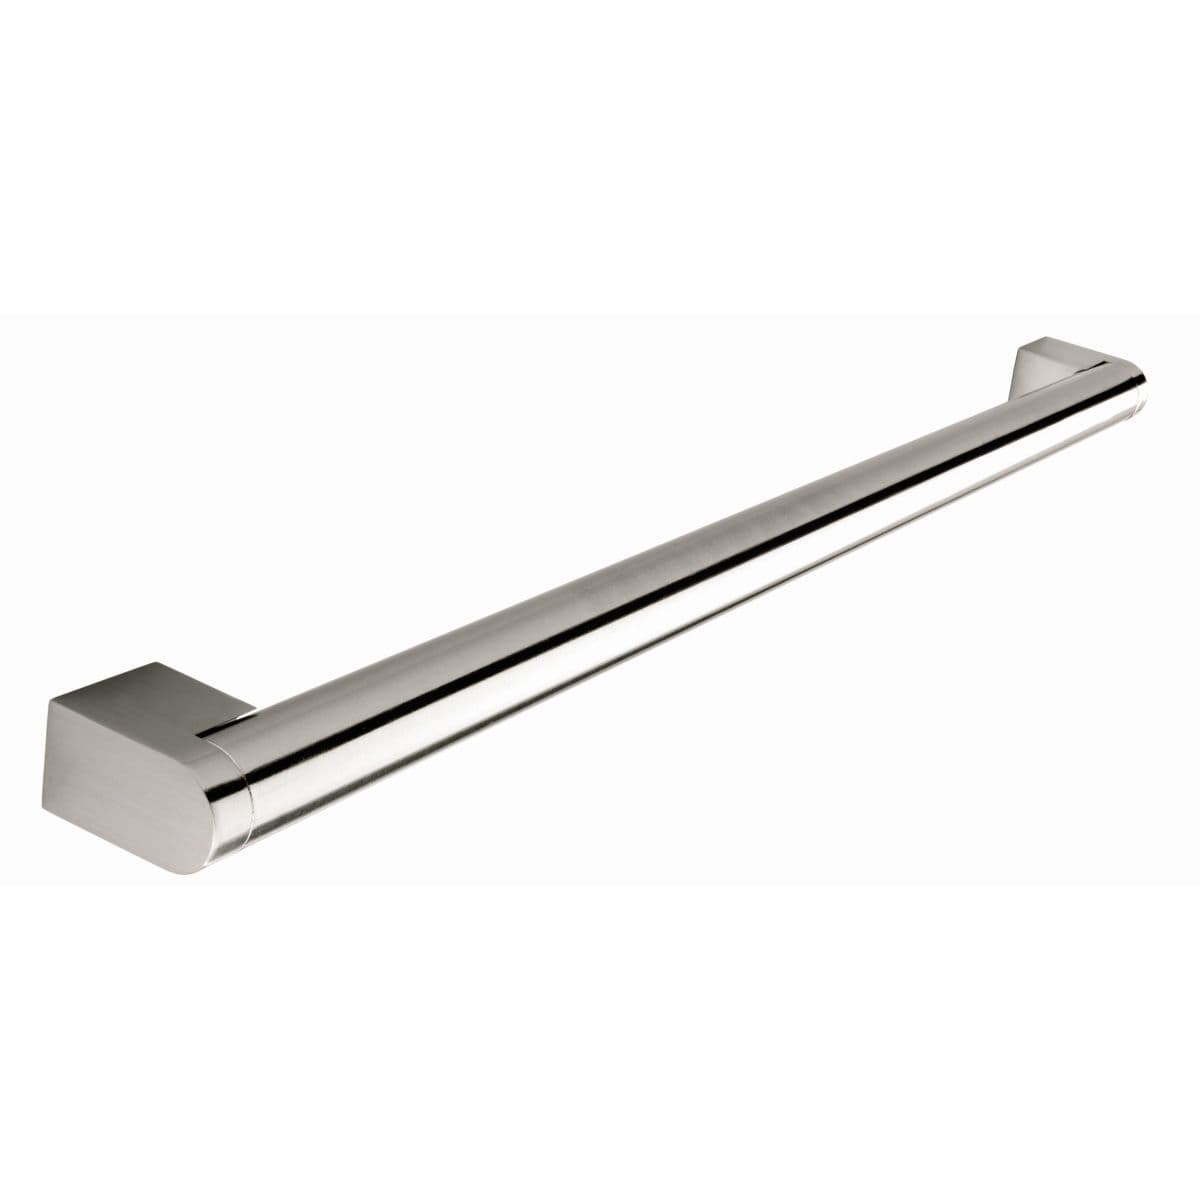 THORPE 22mm dia BAR Cupboard Handle - 2 sizes - BRUSHED S/STEEL EFFECT finish (PWS H196.SS/H197.SS)